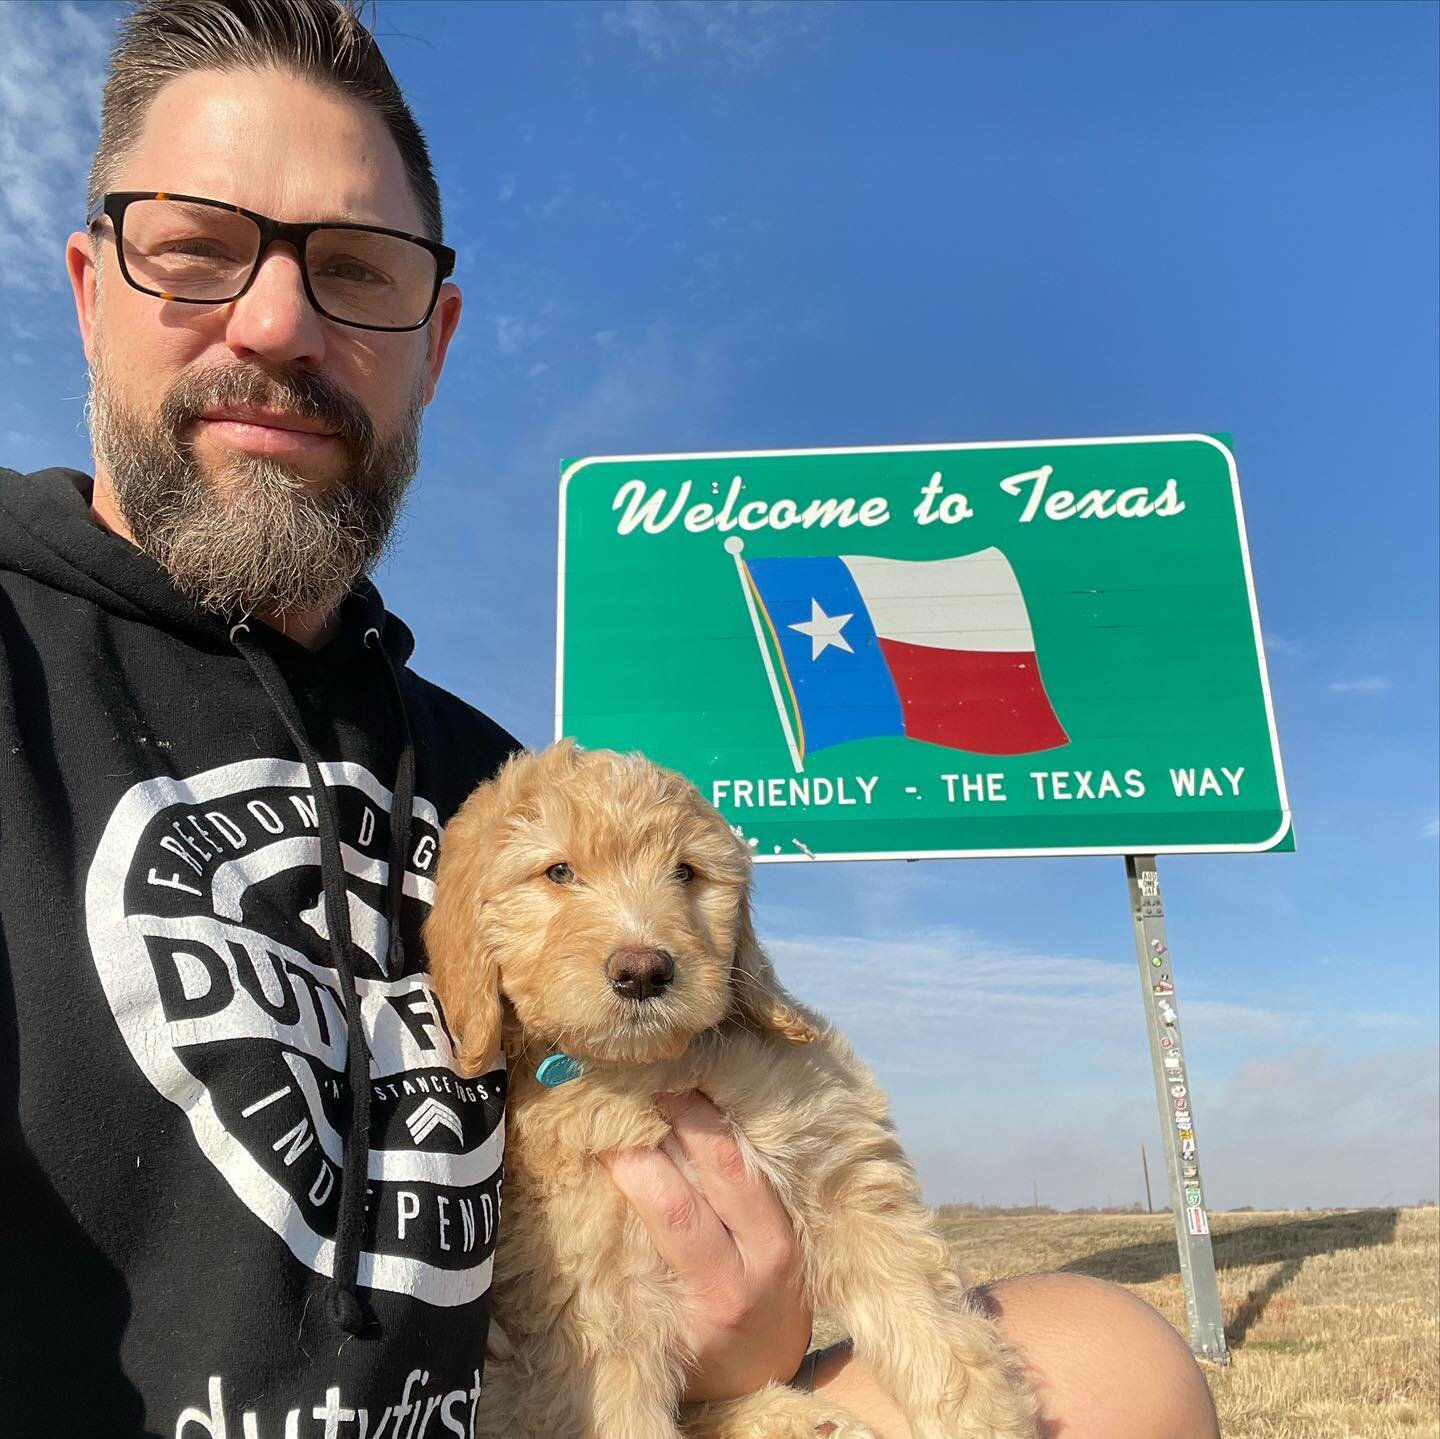 Quite the journey over the last 2 years. Today is just the beginning!  Welcome to Texas, Ren! So much ahead of us, time to get to work. Thanks to all who have supported us and continue to do so. We have lives to change.  #lubbock #westtexas #dutyfirs